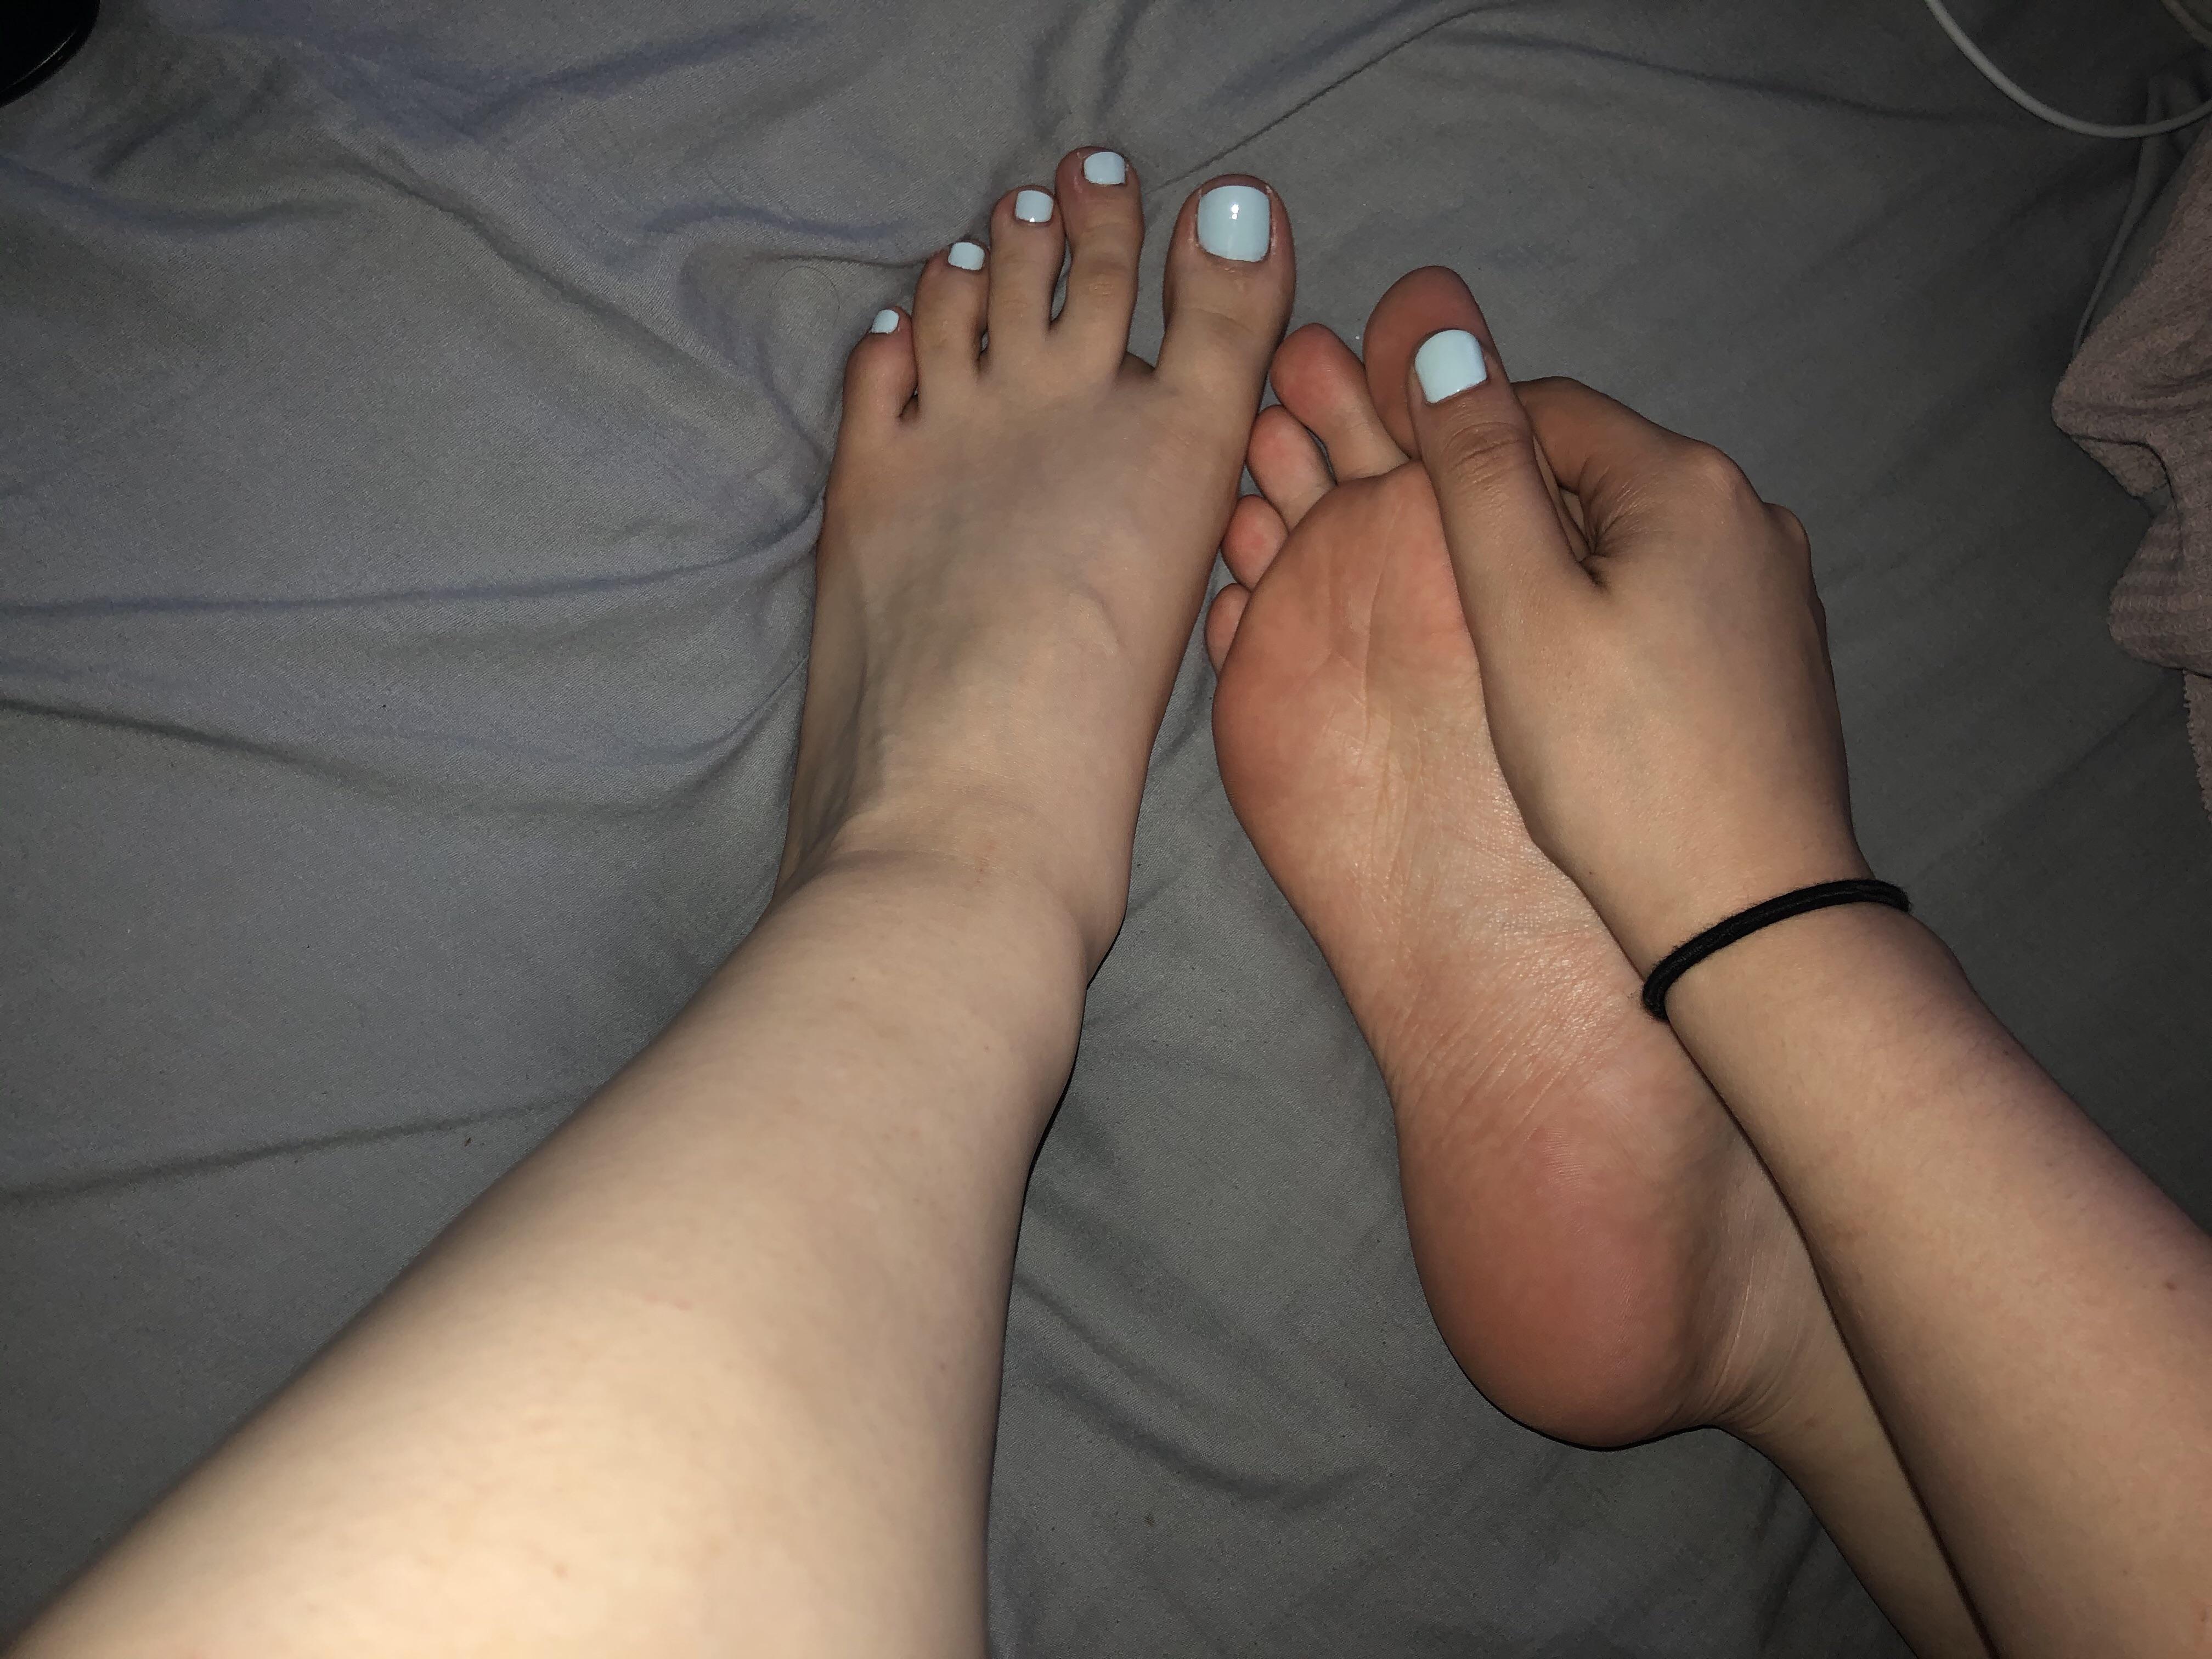 Feet Wikifeet Buy and sell feet pictures and videos on my.wikifeet, a web s...